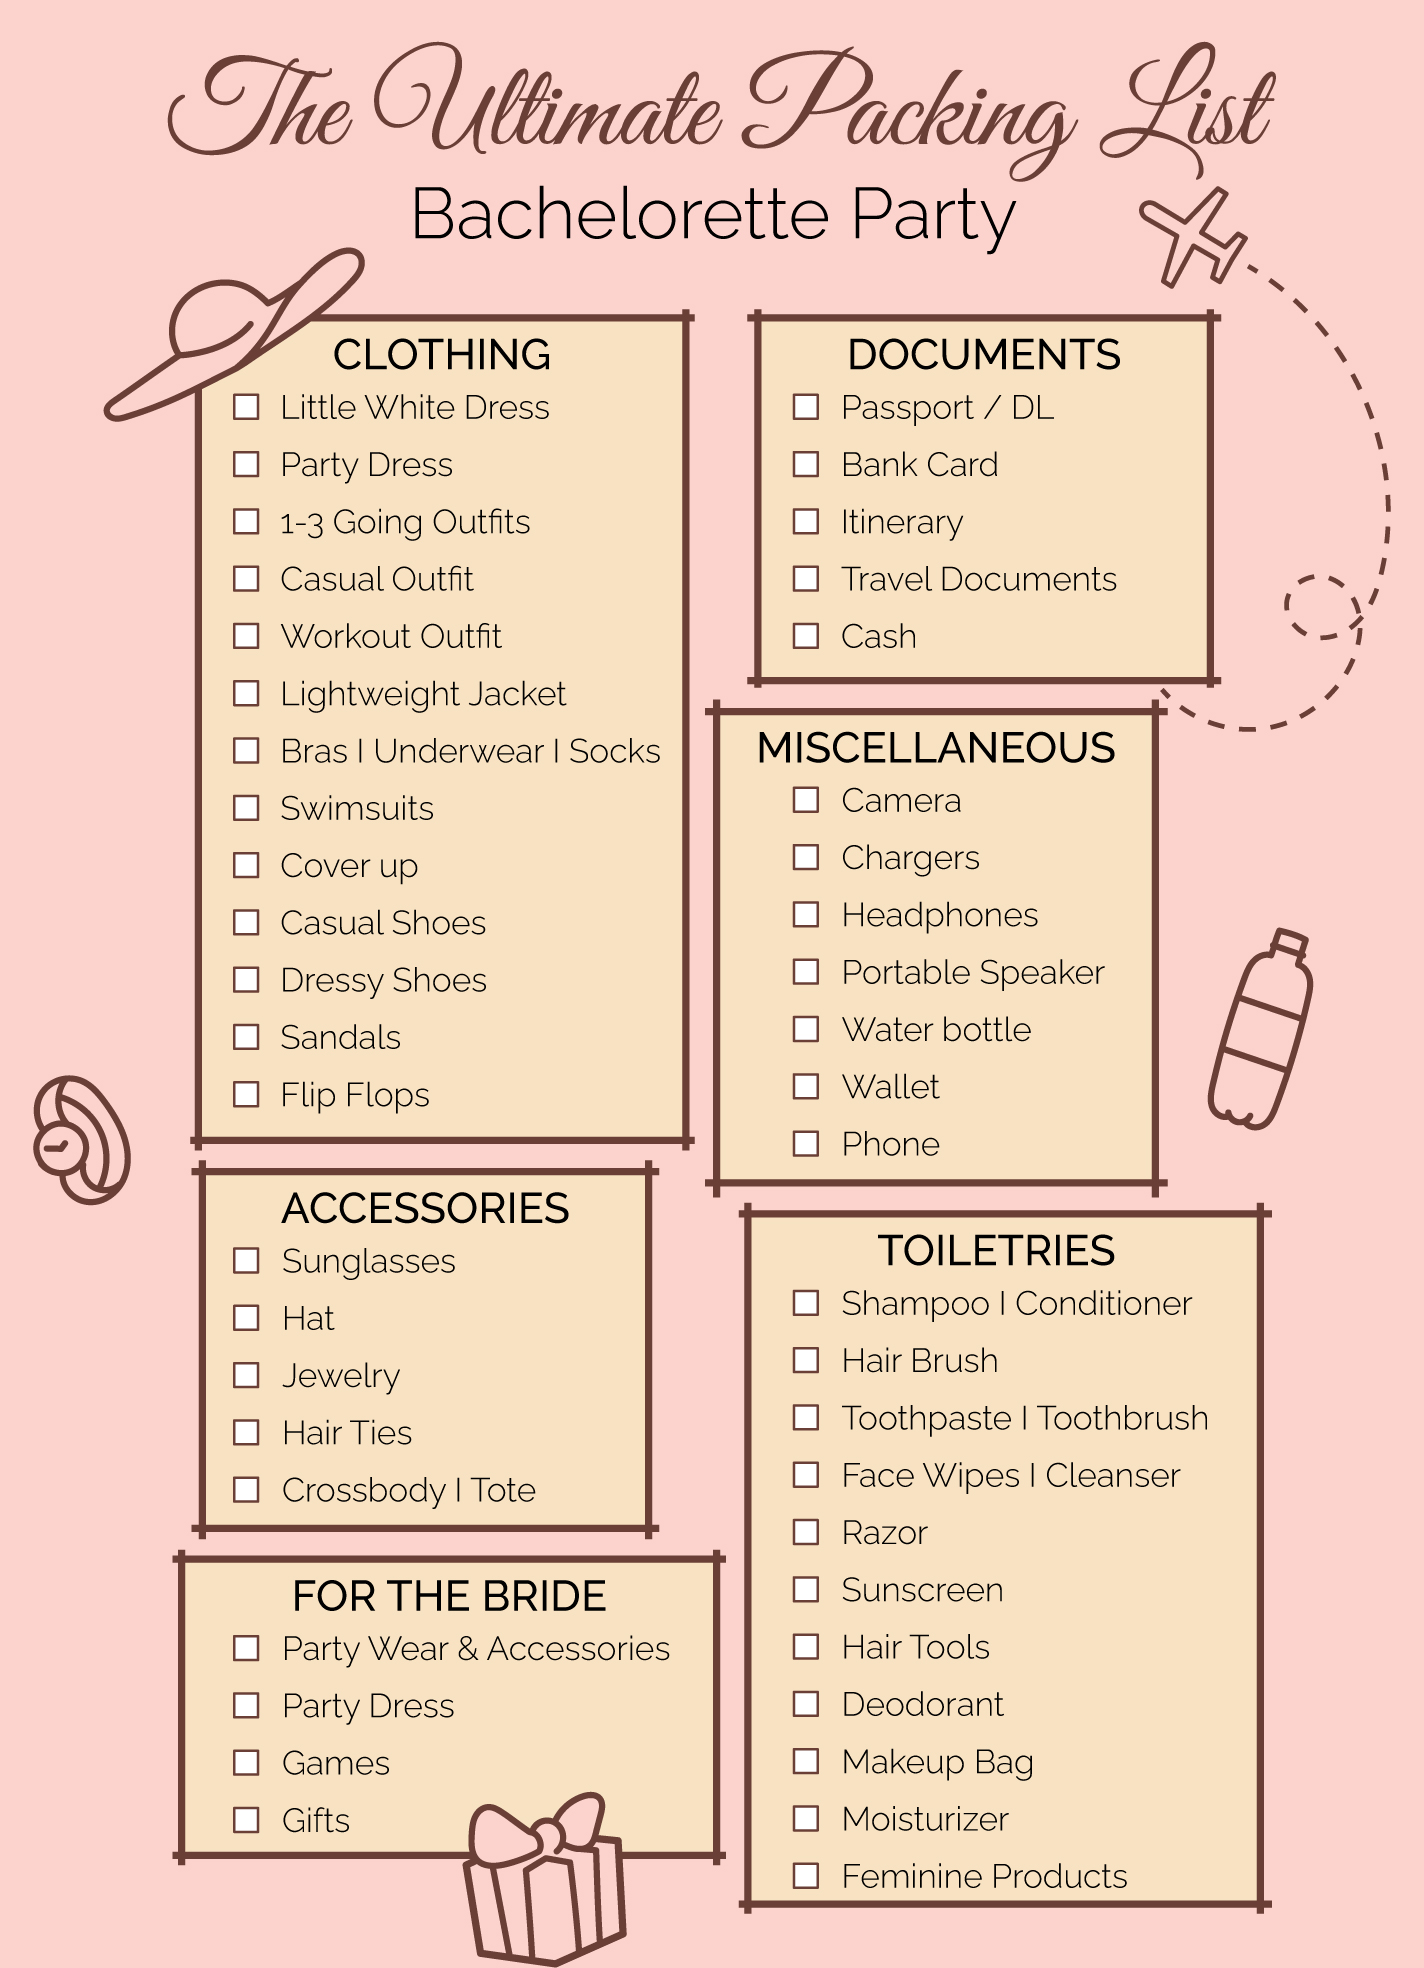 The Ultimate Guide to Packing for A Bachelorette, Honeymoon, and